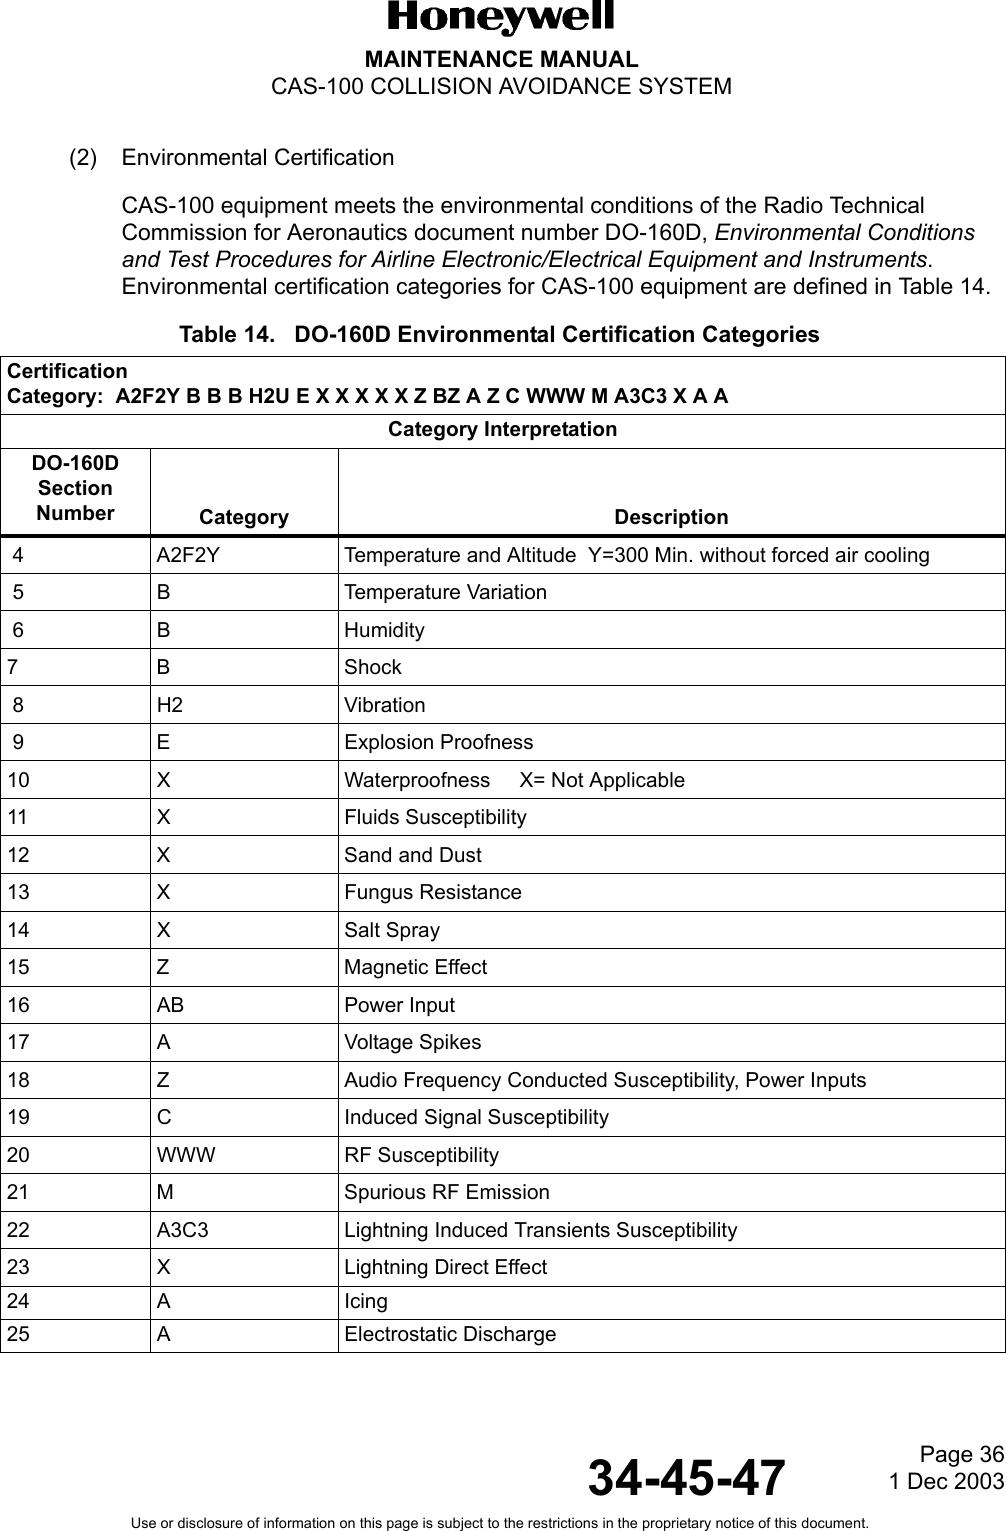 Page 361 Dec 200334-45-47MAINTENANCE MANUALCAS-100 COLLISION AVOIDANCE SYSTEMUse or disclosure of information on this page is subject to the restrictions in the proprietary notice of this document.(2) Environmental CertificationCAS-100 equipment meets the environmental conditions of the Radio Technical Commission for Aeronautics document number DO-160D, Environmental Conditions and Test Procedures for Airline Electronic/Electrical Equipment and Instruments.  Environmental certification categories for CAS-100 equipment are defined in Table 14.Table 14.   DO-160D Environmental Certification CategoriesCertificationCategory:  A2F2Y B B B H2U E X X X X X Z BZ A Z C WWW M A3C3 X A ACategory InterpretationDO-160DSectionNumber Category Description 4 A2F2Y Temperature and Altitude  Y=300 Min. without forced air cooling 5 B Temperature Variation 6 B Humidity7B Shock 8H2 Vibration 9 E Explosion Proofness        10 X Waterproofness     X= Not Applicable11 X Fluids Susceptibility12 X Sand and Dust13 X Fungus Resistance14 X Salt Spray15 Z Magnetic Effect16 AB Power Input17 A Voltage Spikes18 Z Audio Frequency Conducted Susceptibility, Power Inputs19 C Induced Signal Susceptibility20 WWW RF Susceptibility21 M Spurious RF Emission22 A3C3 Lightning Induced Transients Susceptibility23 X Lightning Direct Effect24 A Icing25 A Electrostatic Discharge